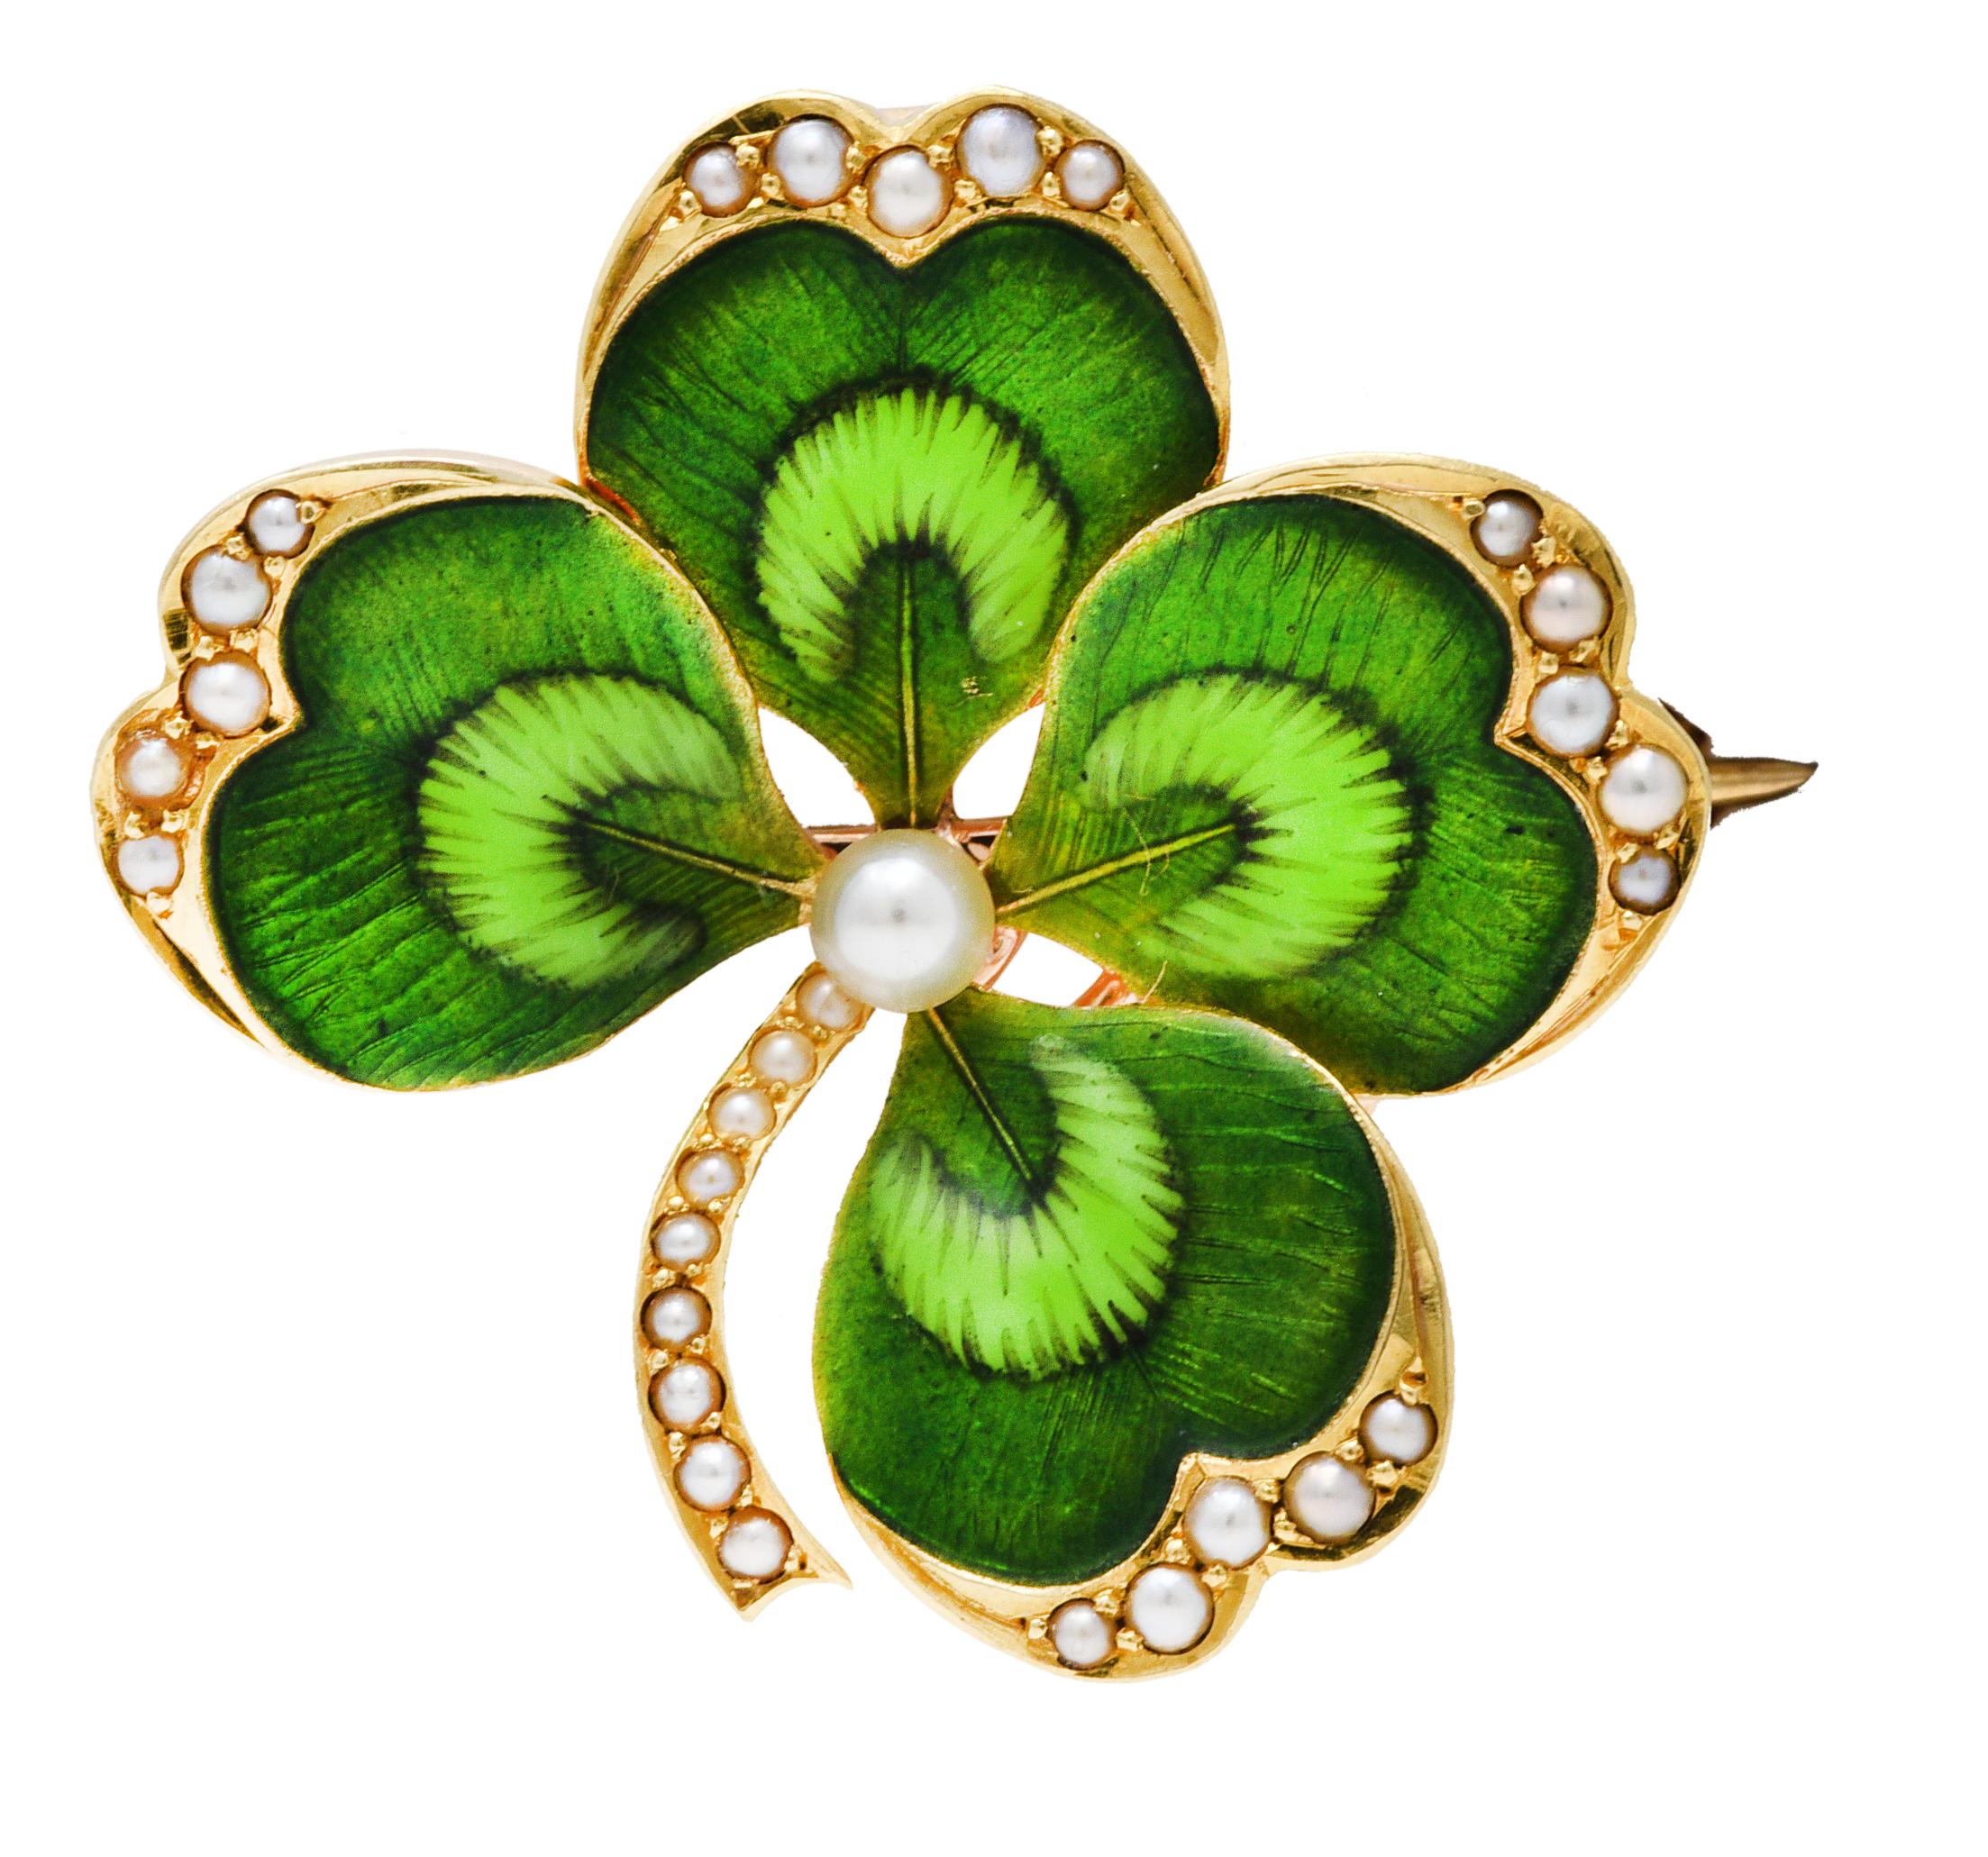 Pendant brooch is designed as a four leaf clover with painted matte guilloche enamel leaves

Transparent deep green with engraved linear pattern with opaque light green accents

Centering a 3.0 mm round pearl - white in body color with mild